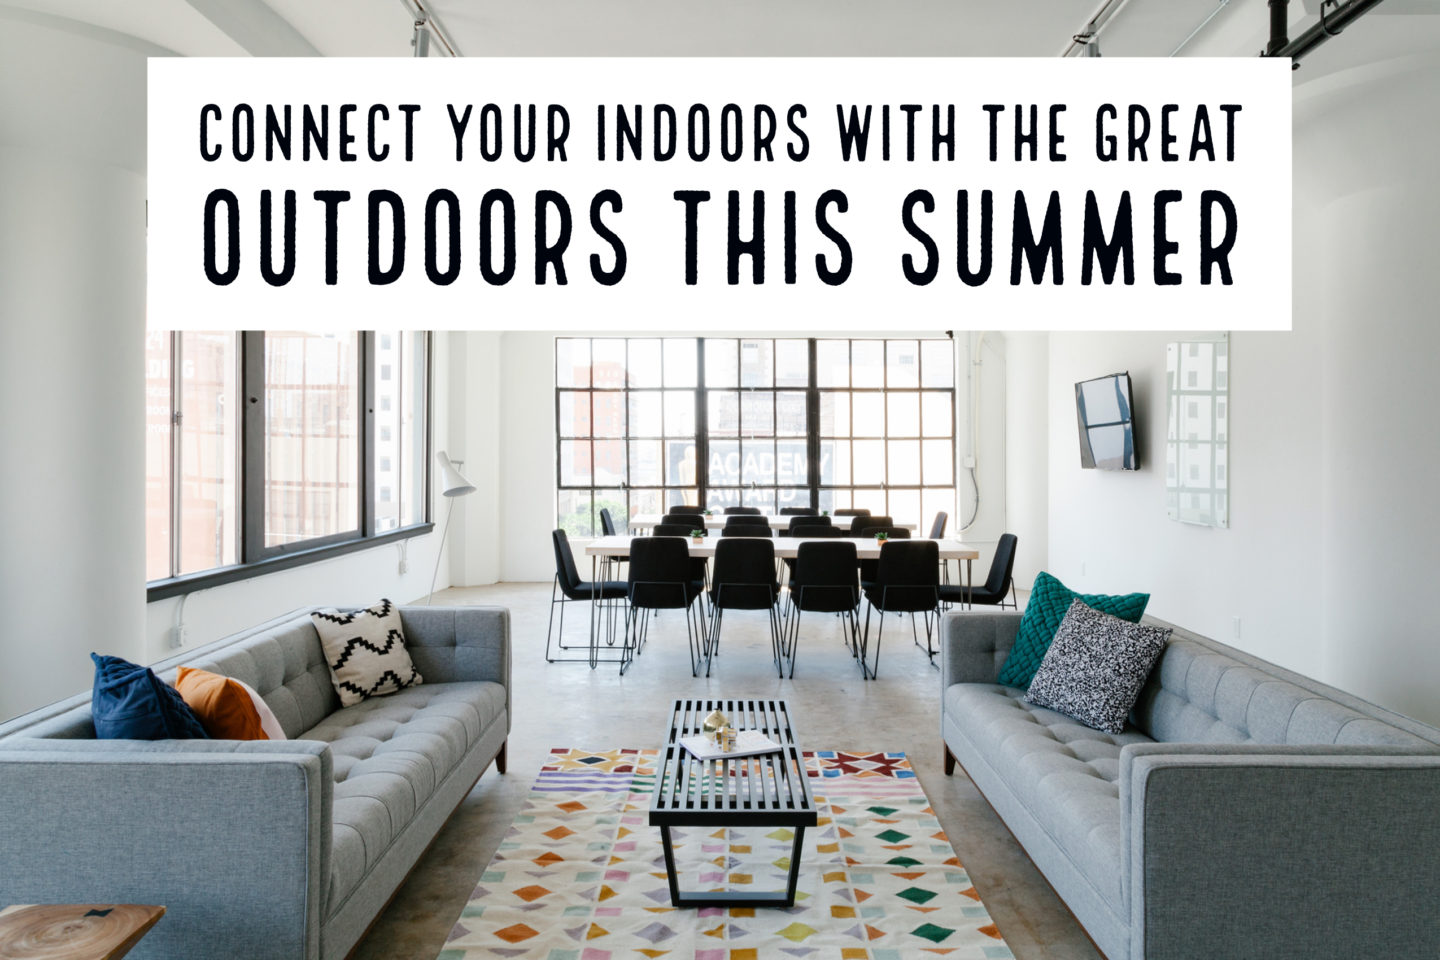 Interiors // Connect Your Indoors with the Great Outdoors this Summer